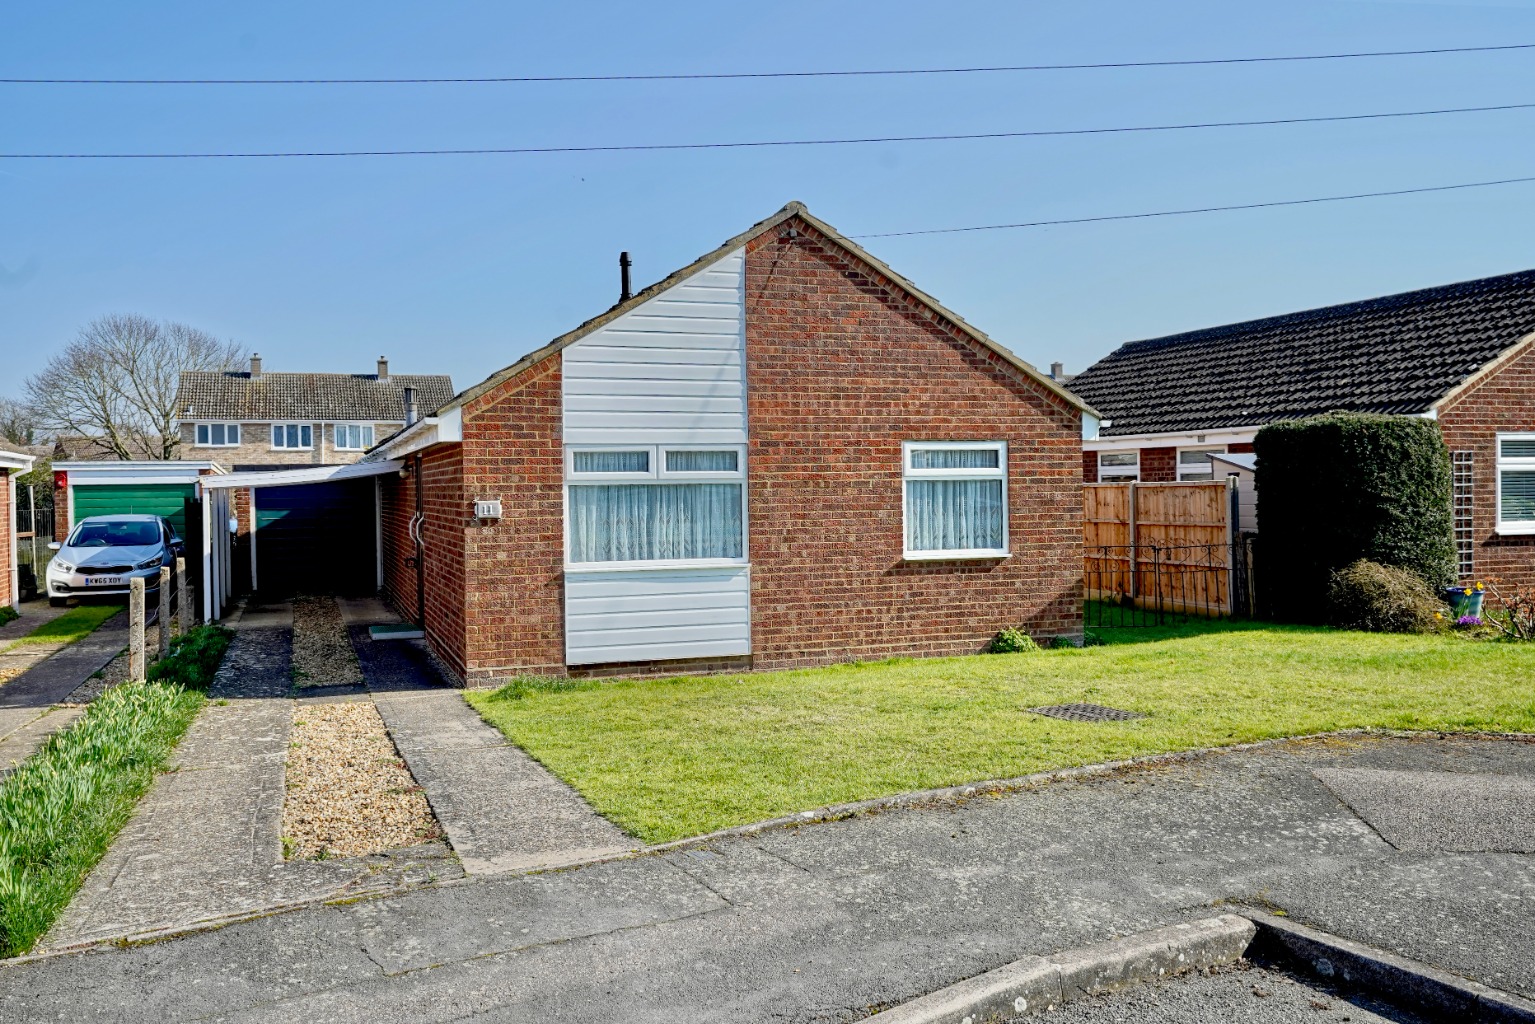 **Rarely available detached bungalow* single garage and ample parking* Two good size bedrooms* conservatory* good size rear garden* contact us to arrange your viewing**